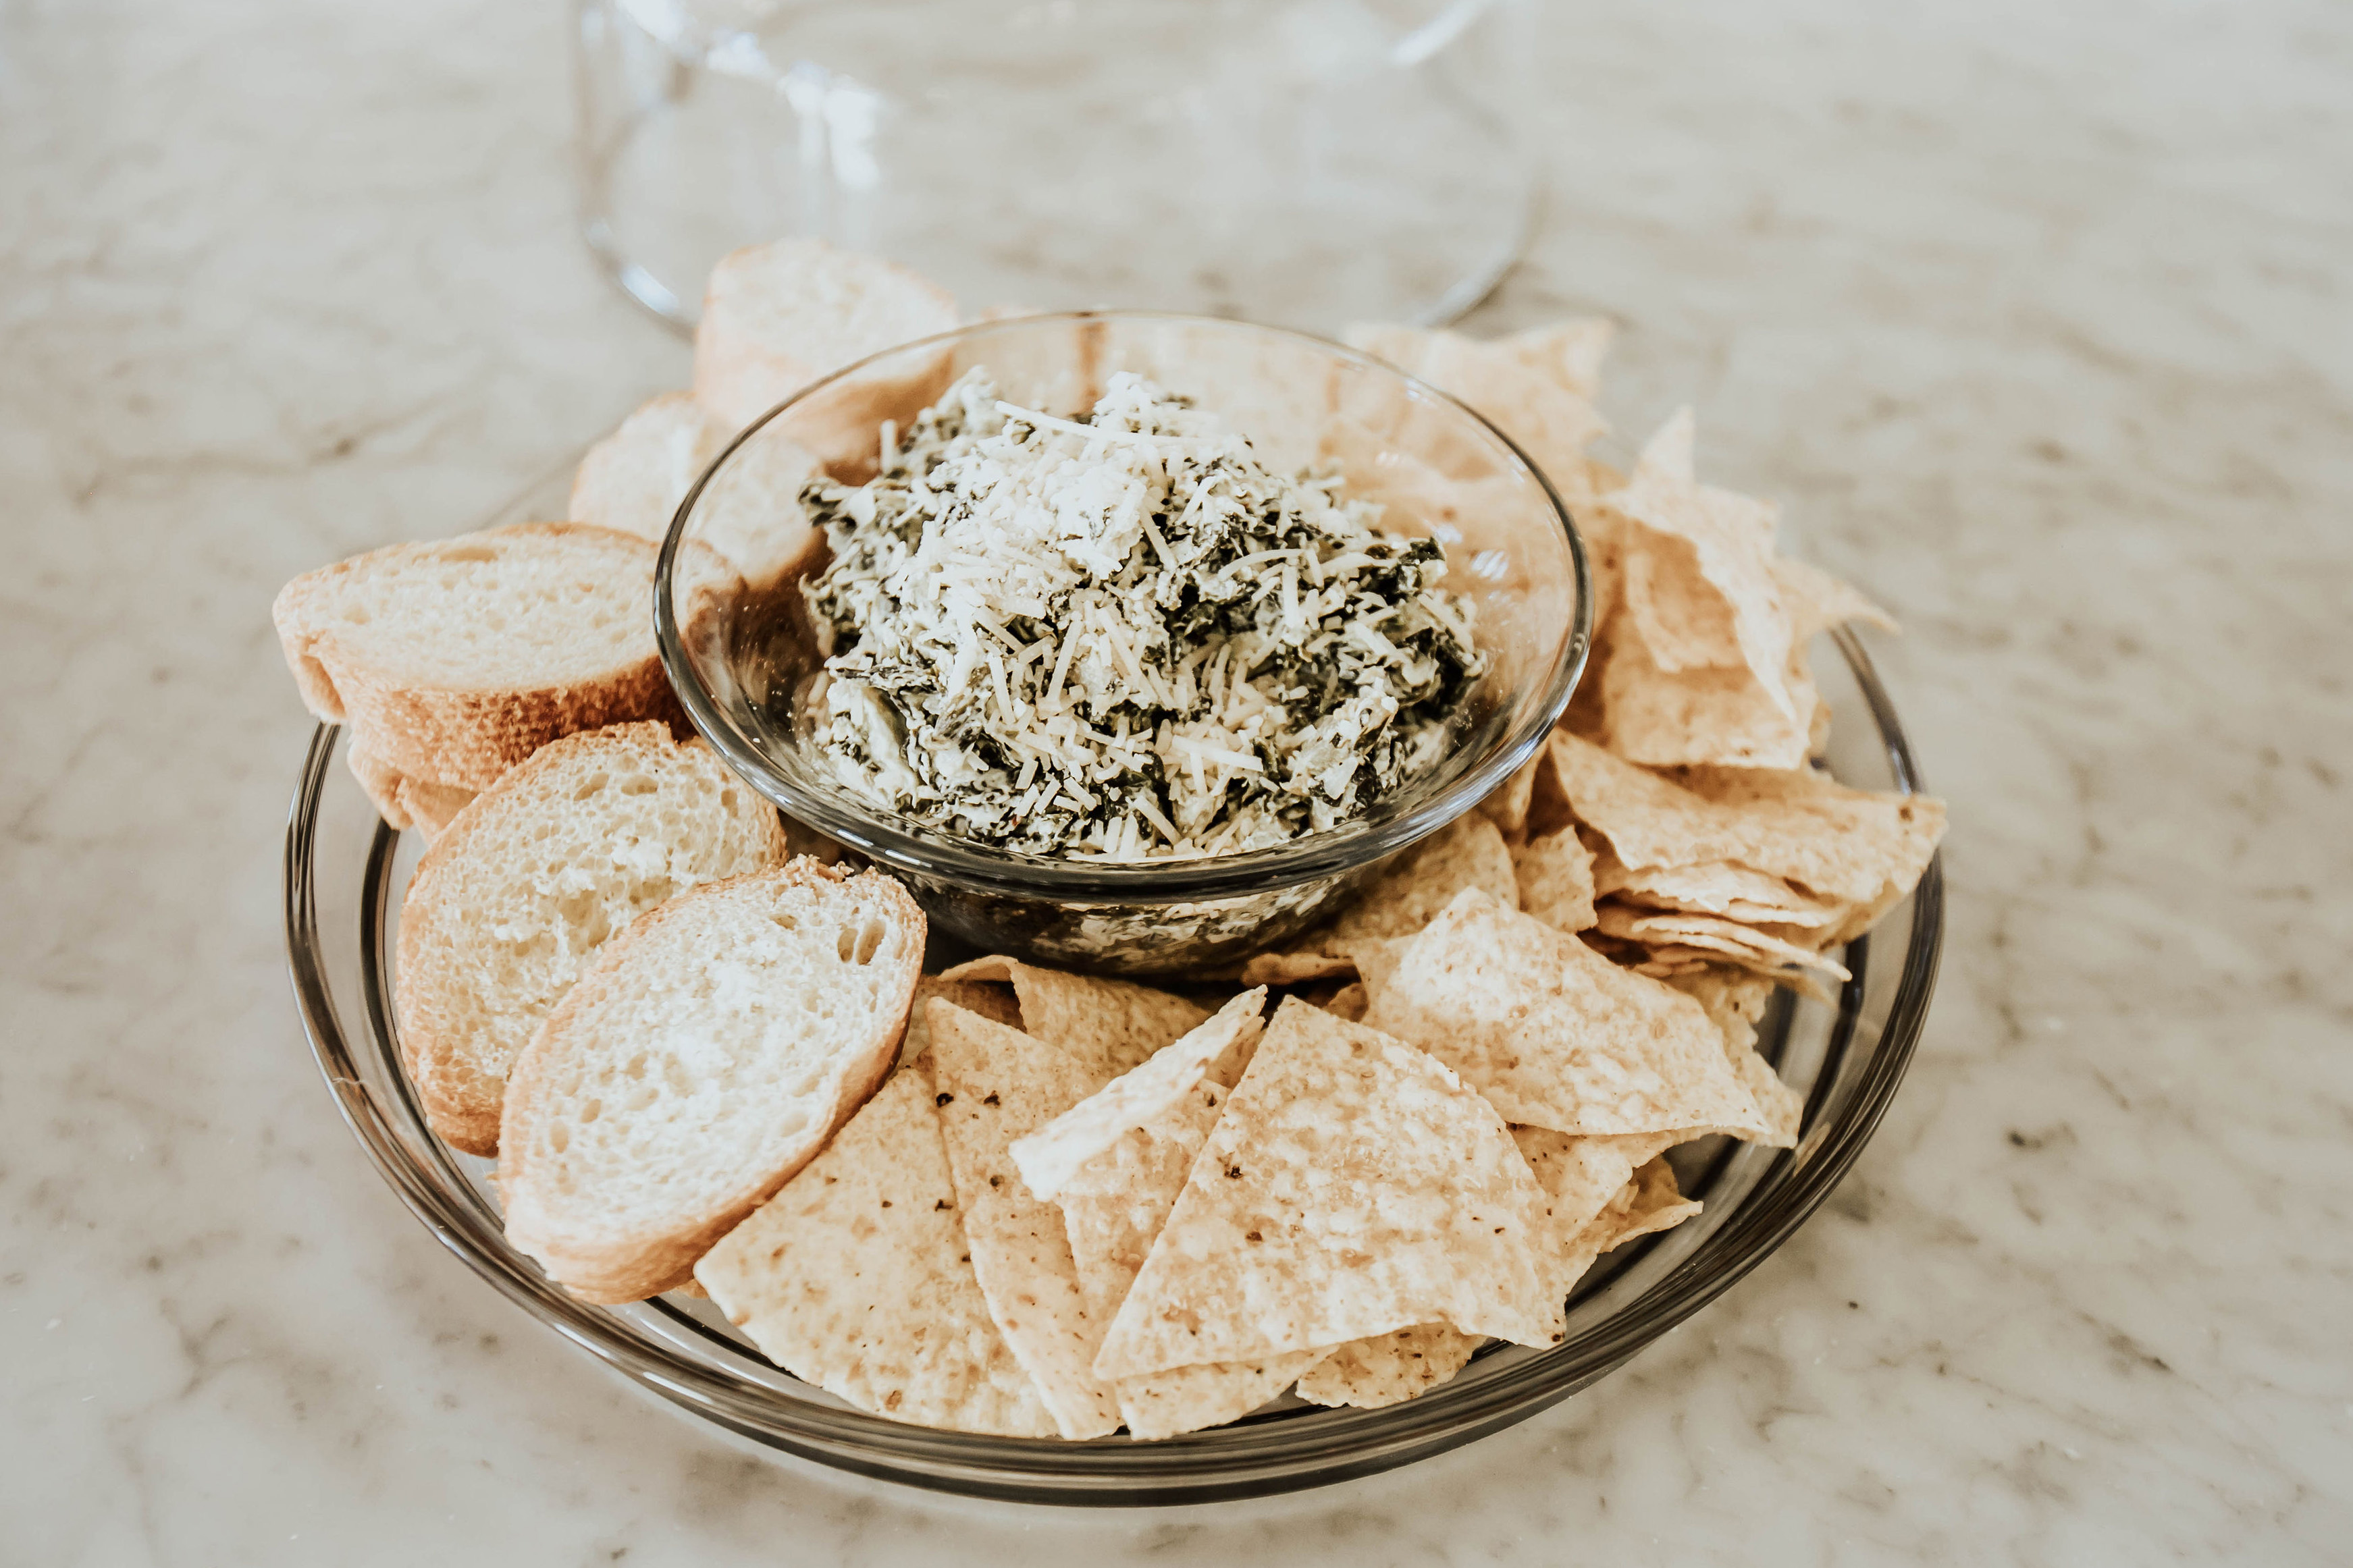 Emily Farren Wieczorek and Ashley Zeal of two peas in a prada share their game day rituals and Emily shares her recipe for Healthy Spinach Artichoke Dip